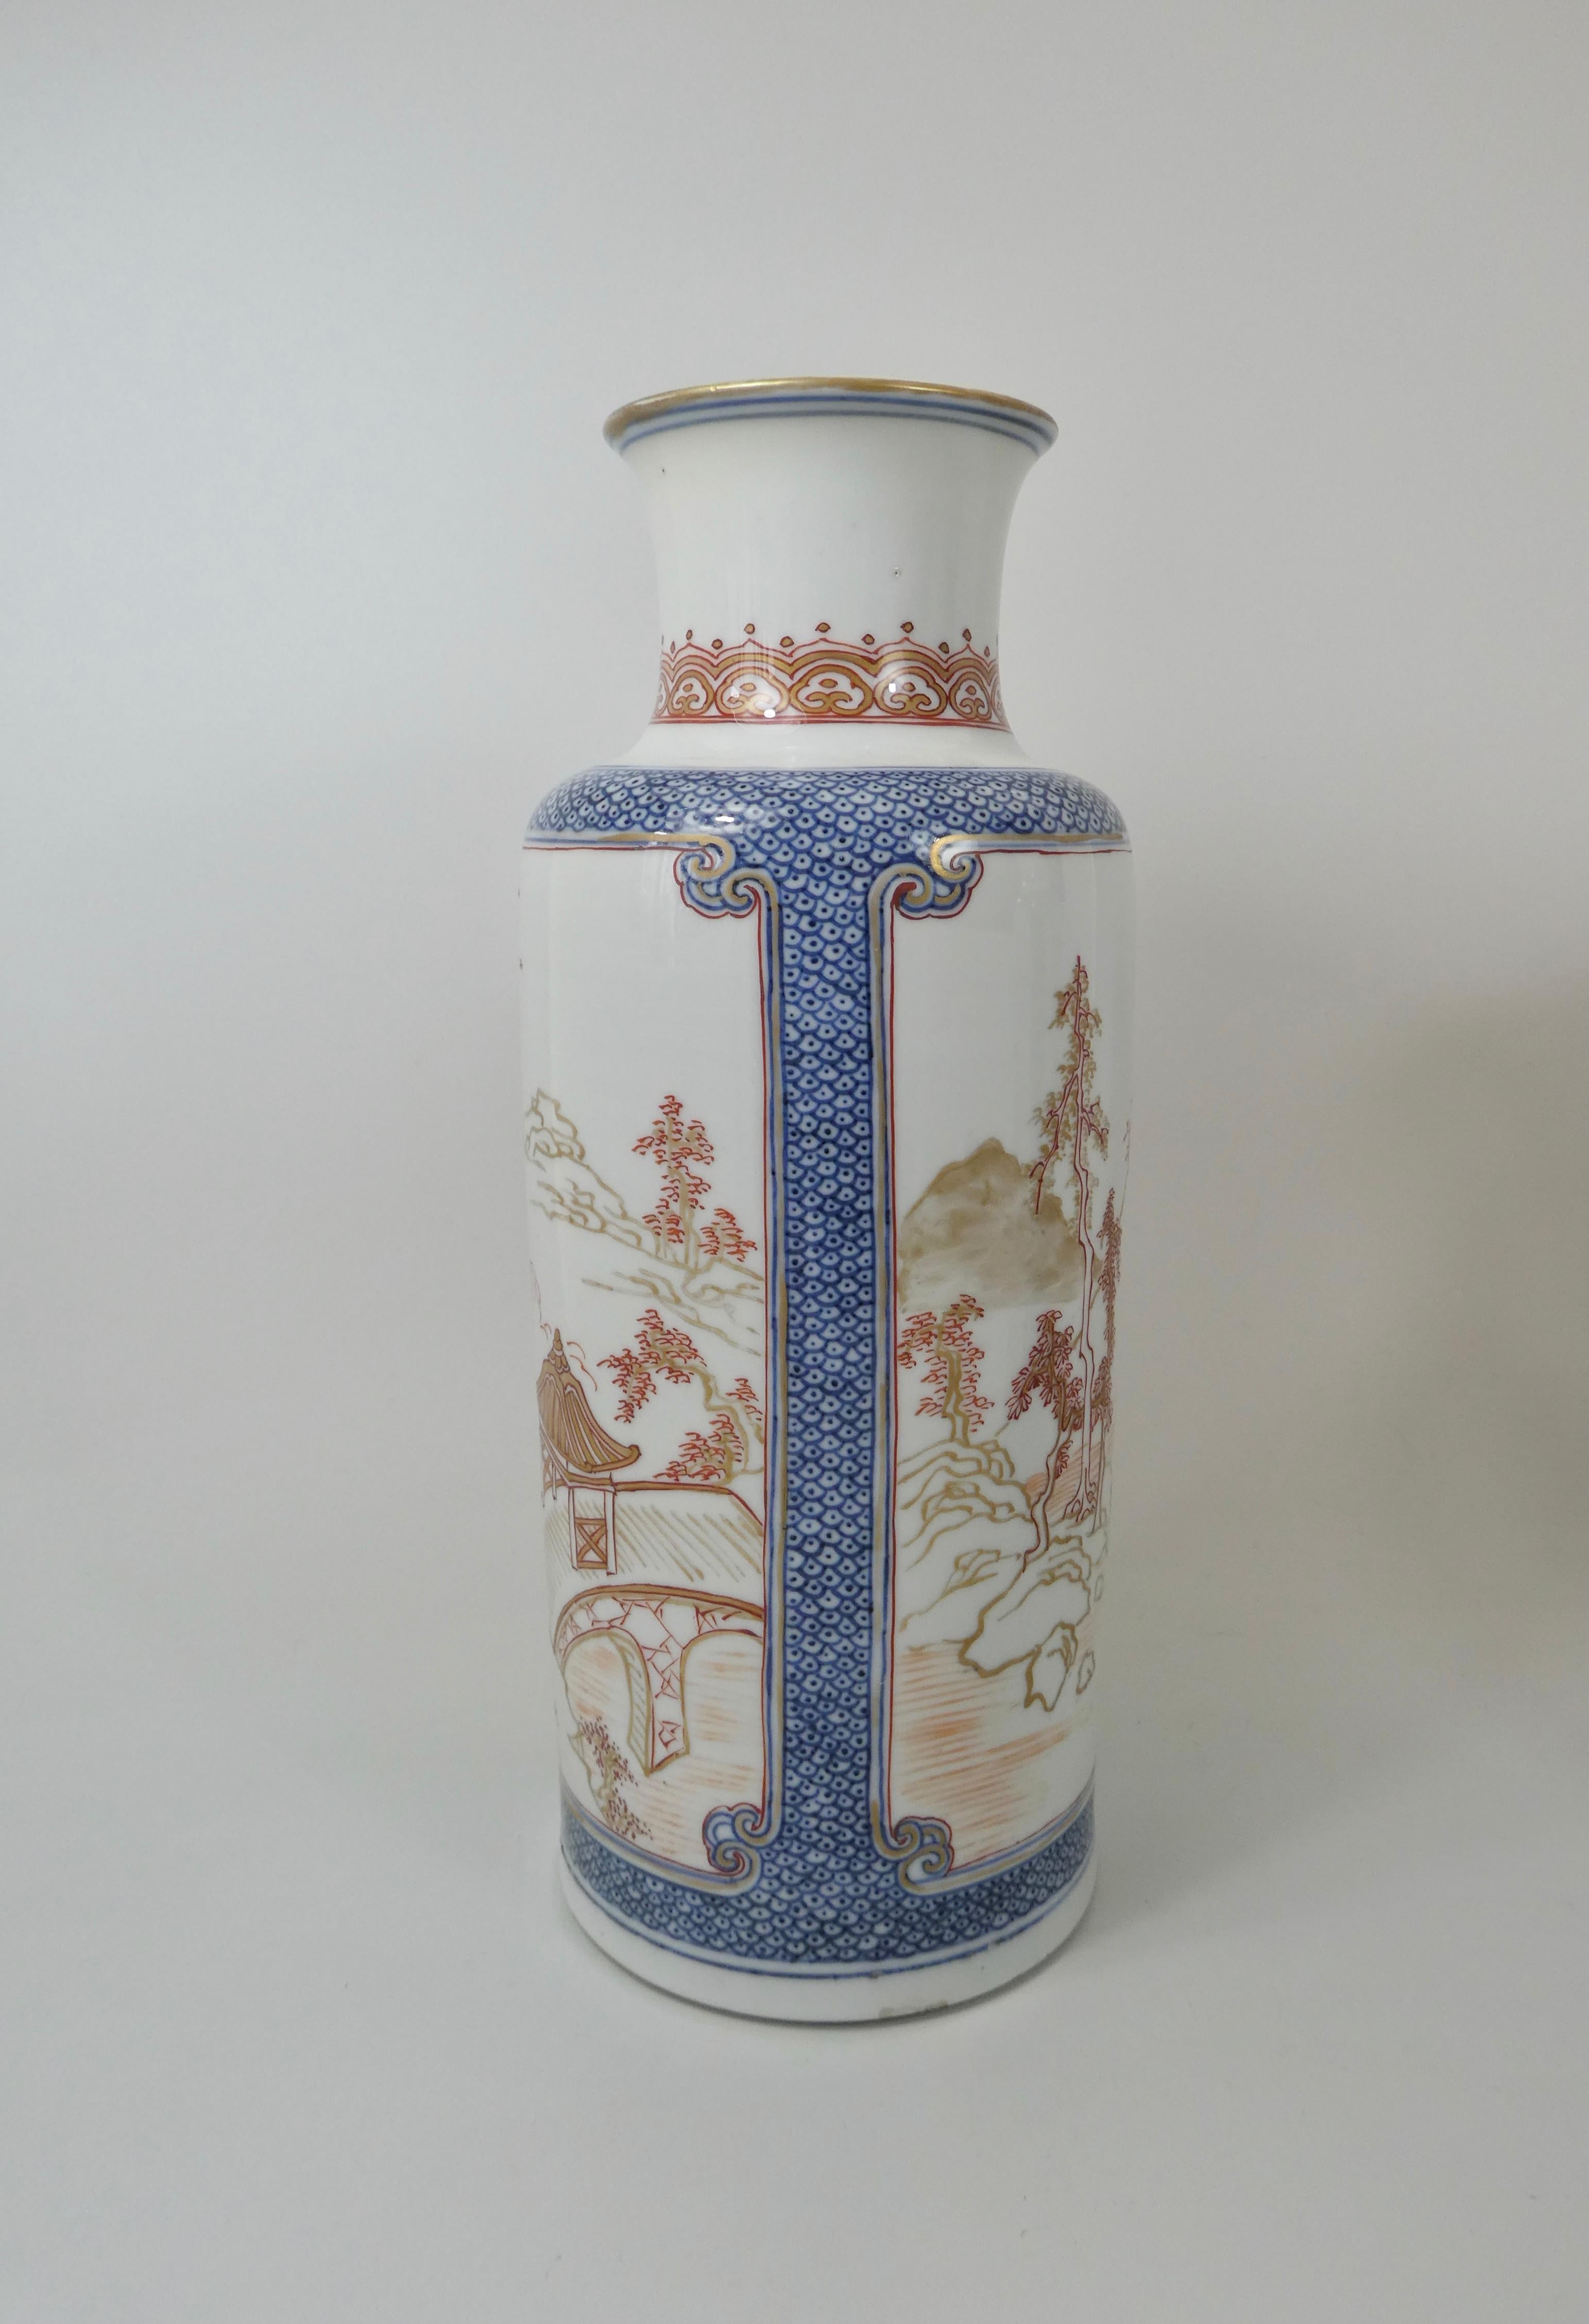 Pair of Chinese Porcelain ‘Rouge de Fer’ Decorated Vases, c. 1700. Kangxi. 5